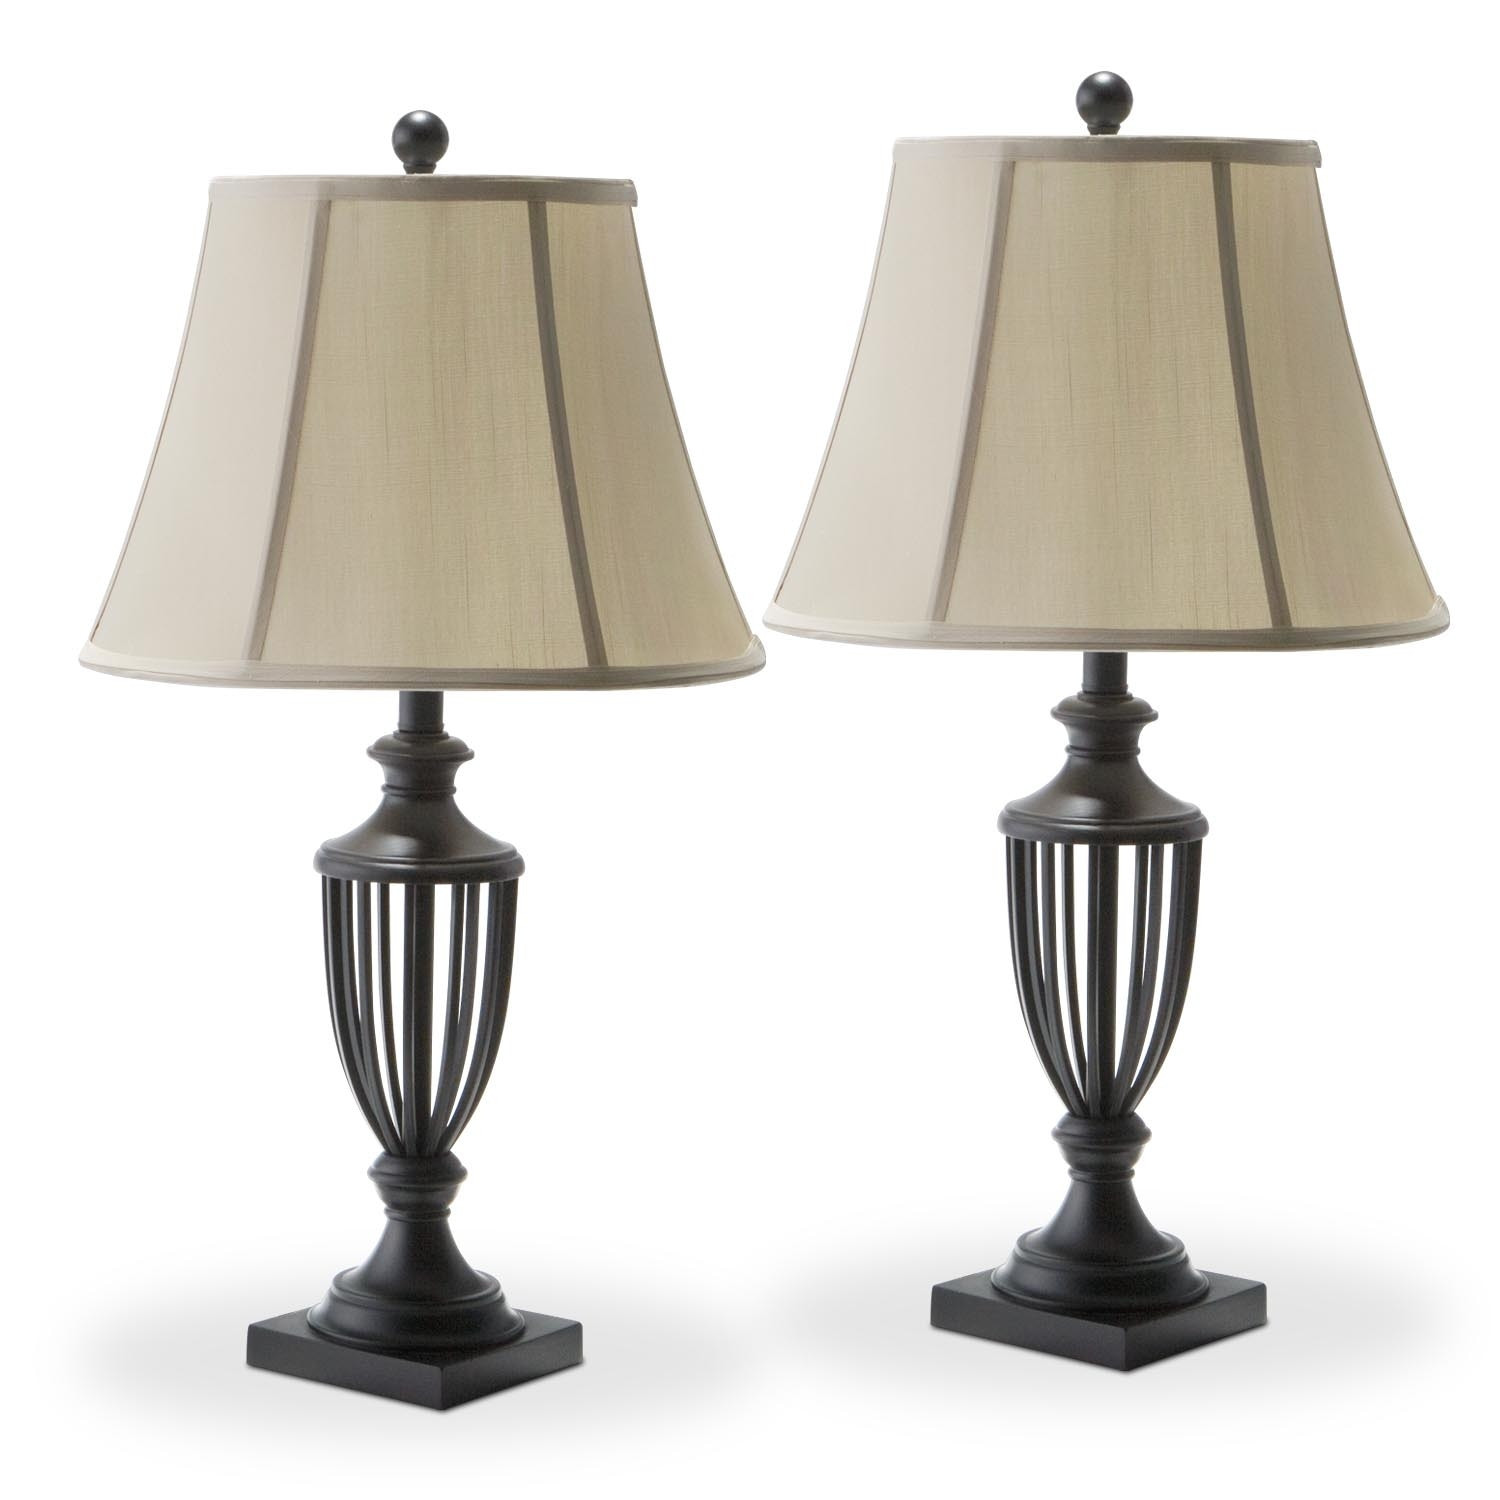 Living Room Table Lamps
 Mason 2 Pack Table Lamp Set